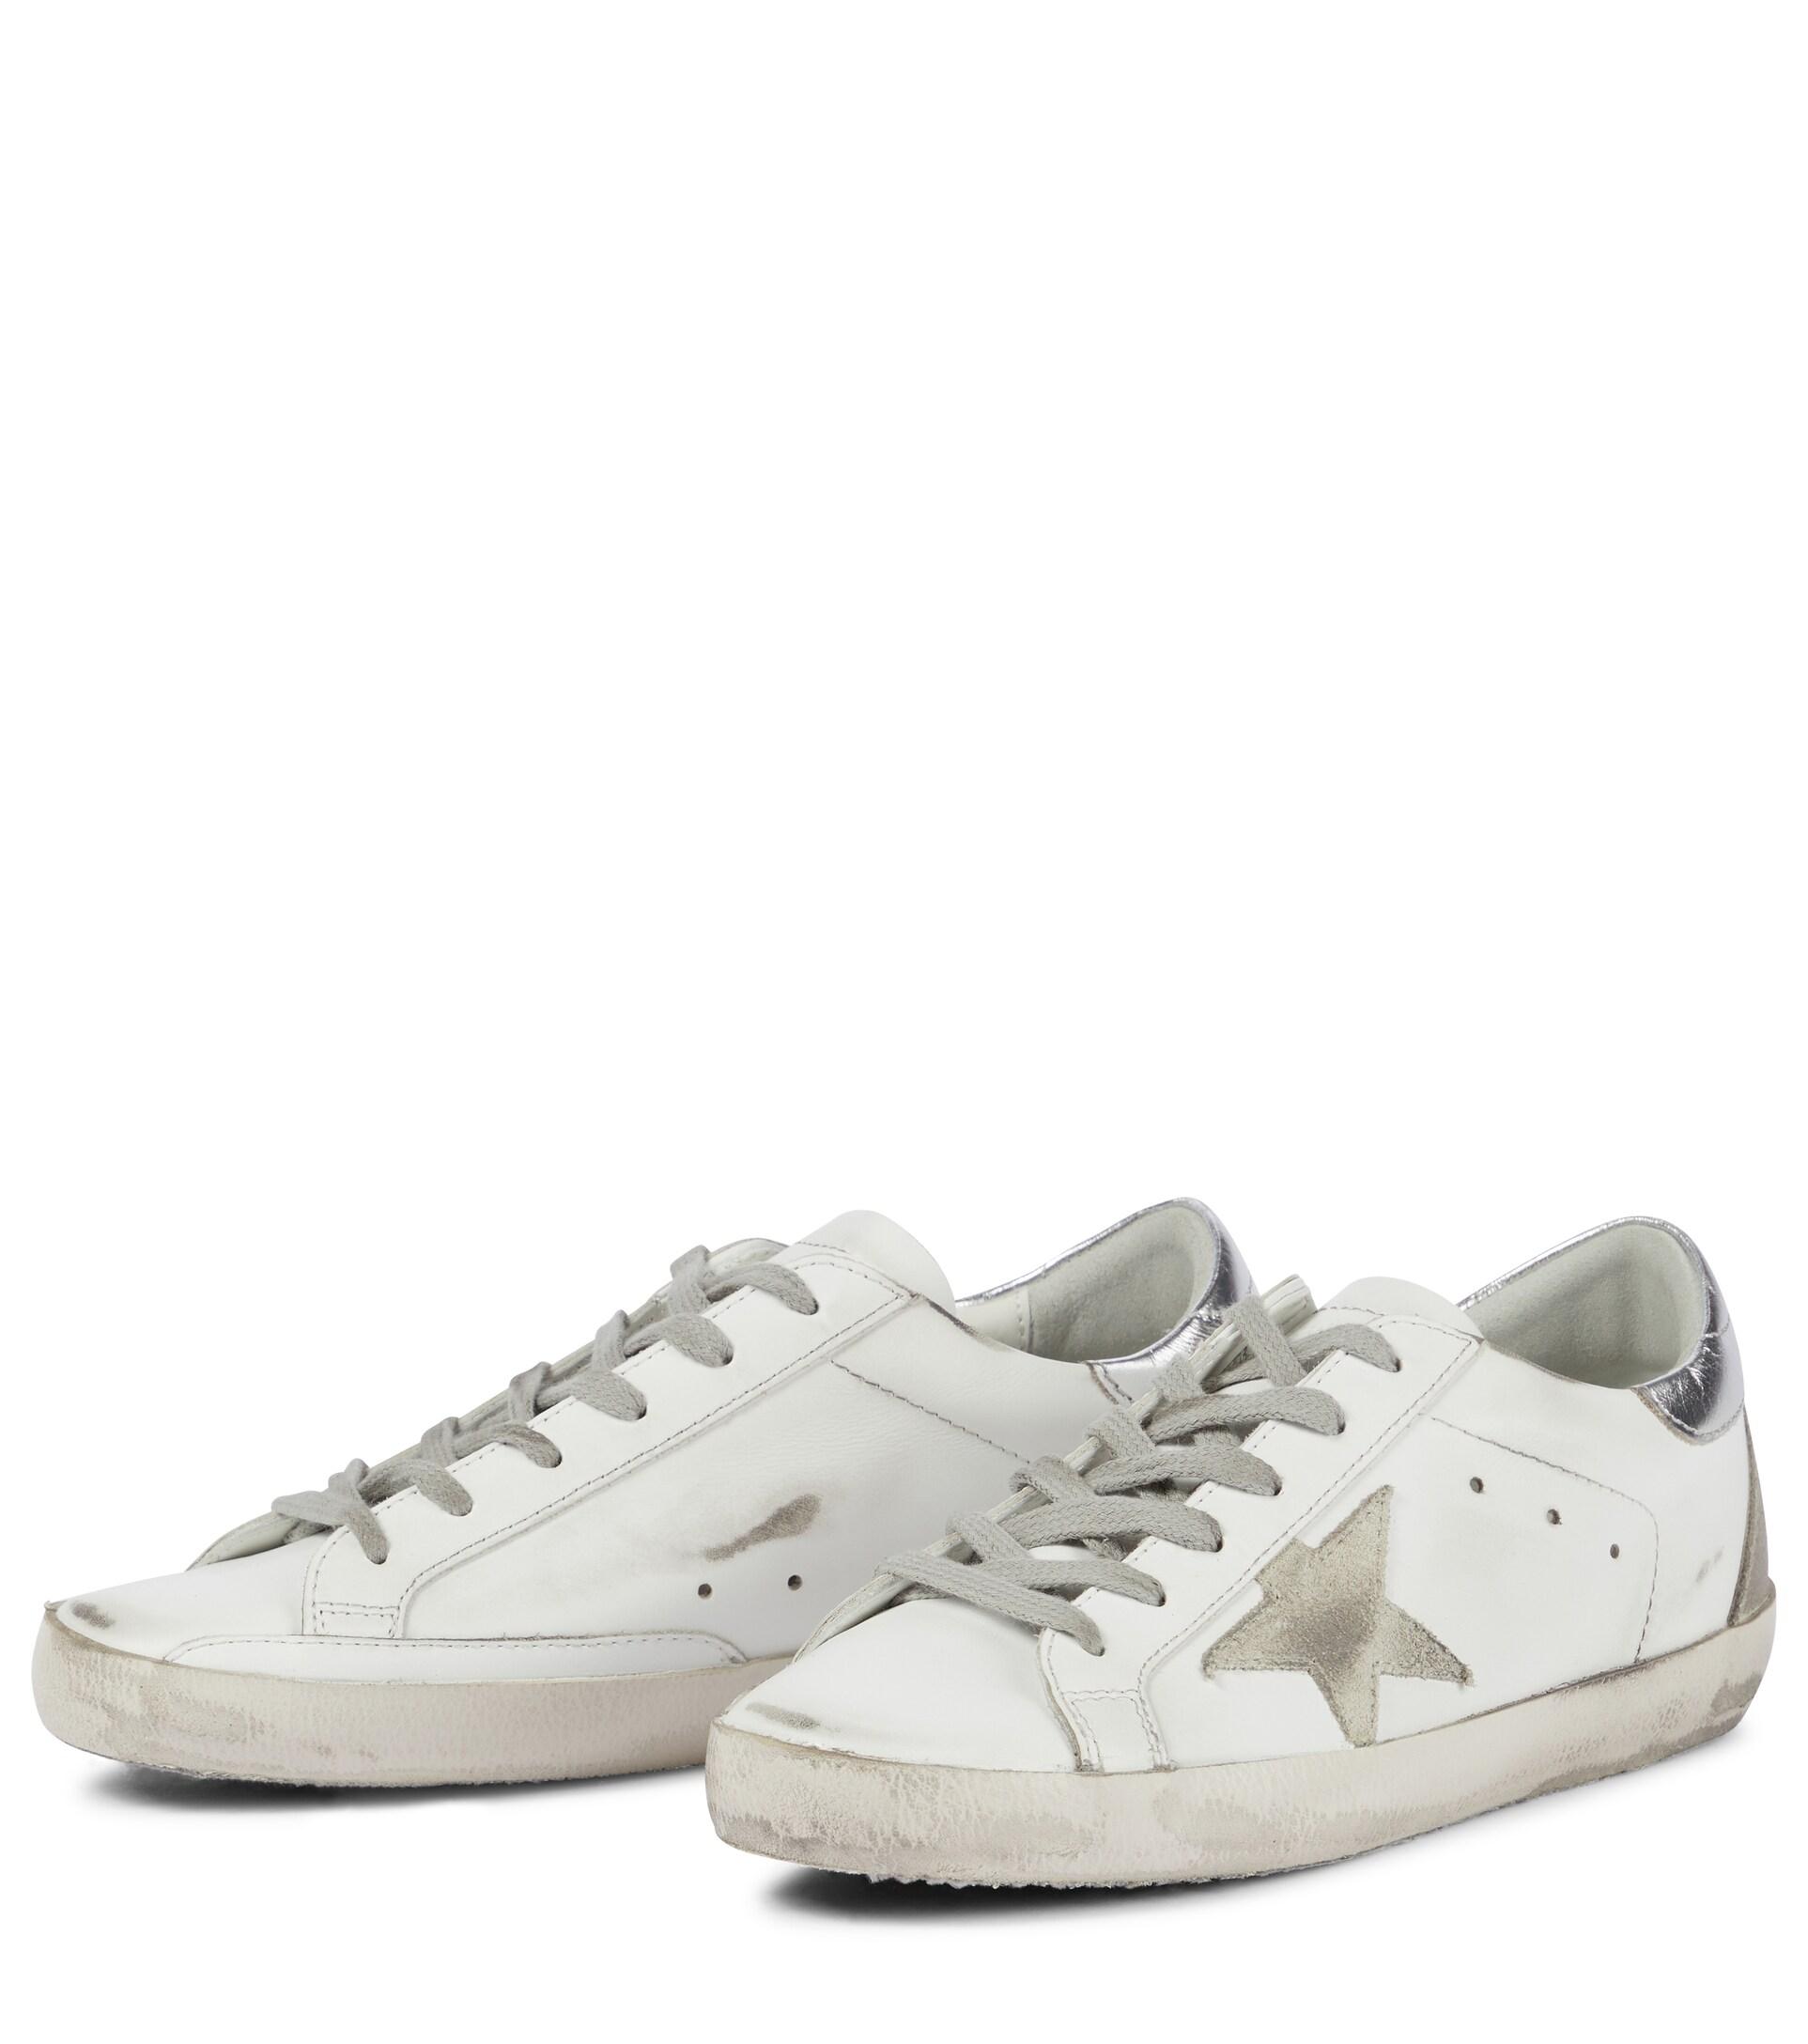 Golden Goose Superstar Leather Sneakers in White | Lyst